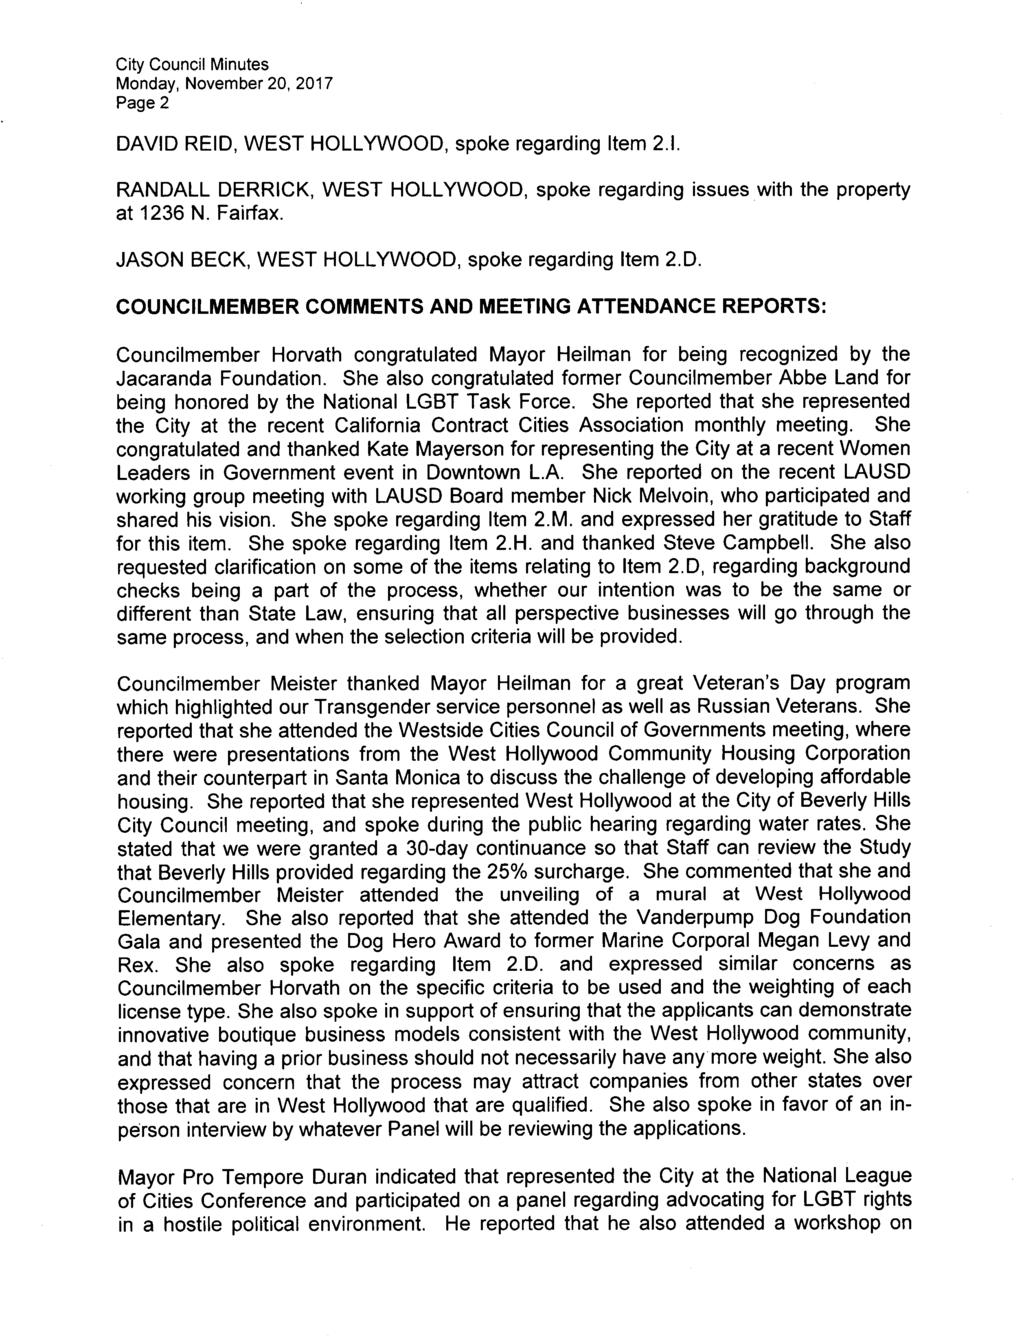 Page 2 DAVID REID, WEST HOLLYWOOD, spoke regarding Item 2.1. RANDALL DERRICK, WEST HOLLYWOOD, spoke regarding issues with the property at 1236 N. Fairfax.